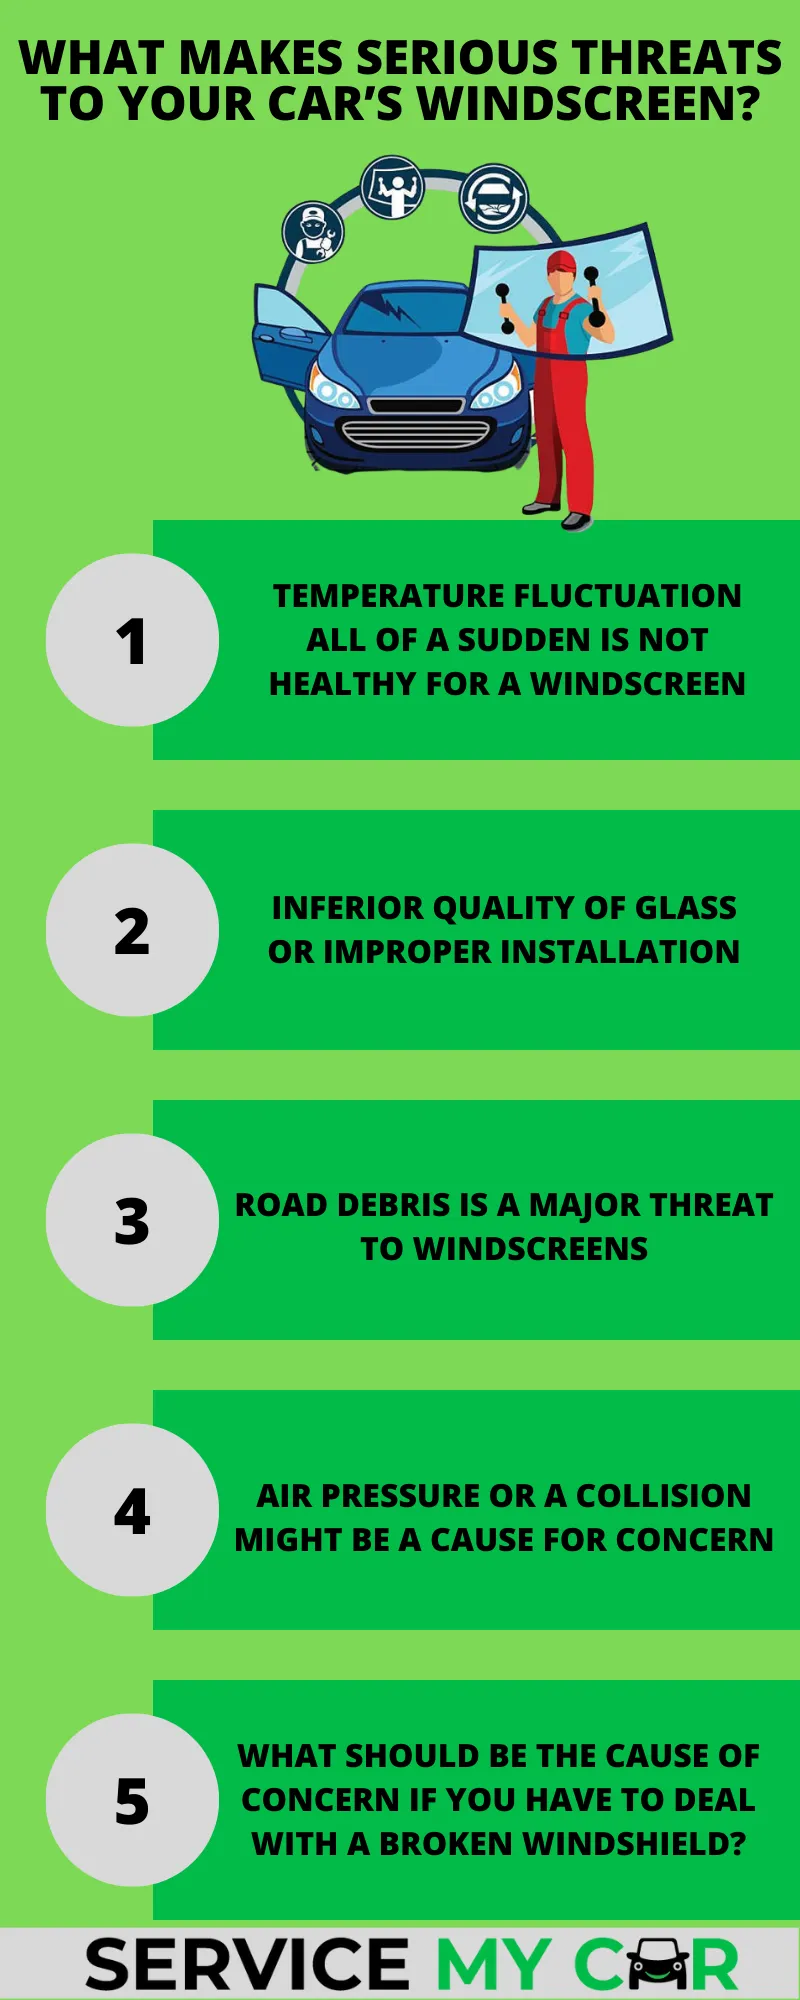 What Makes Serious Threats to Your Car’s Windscreen? (Service My Car)